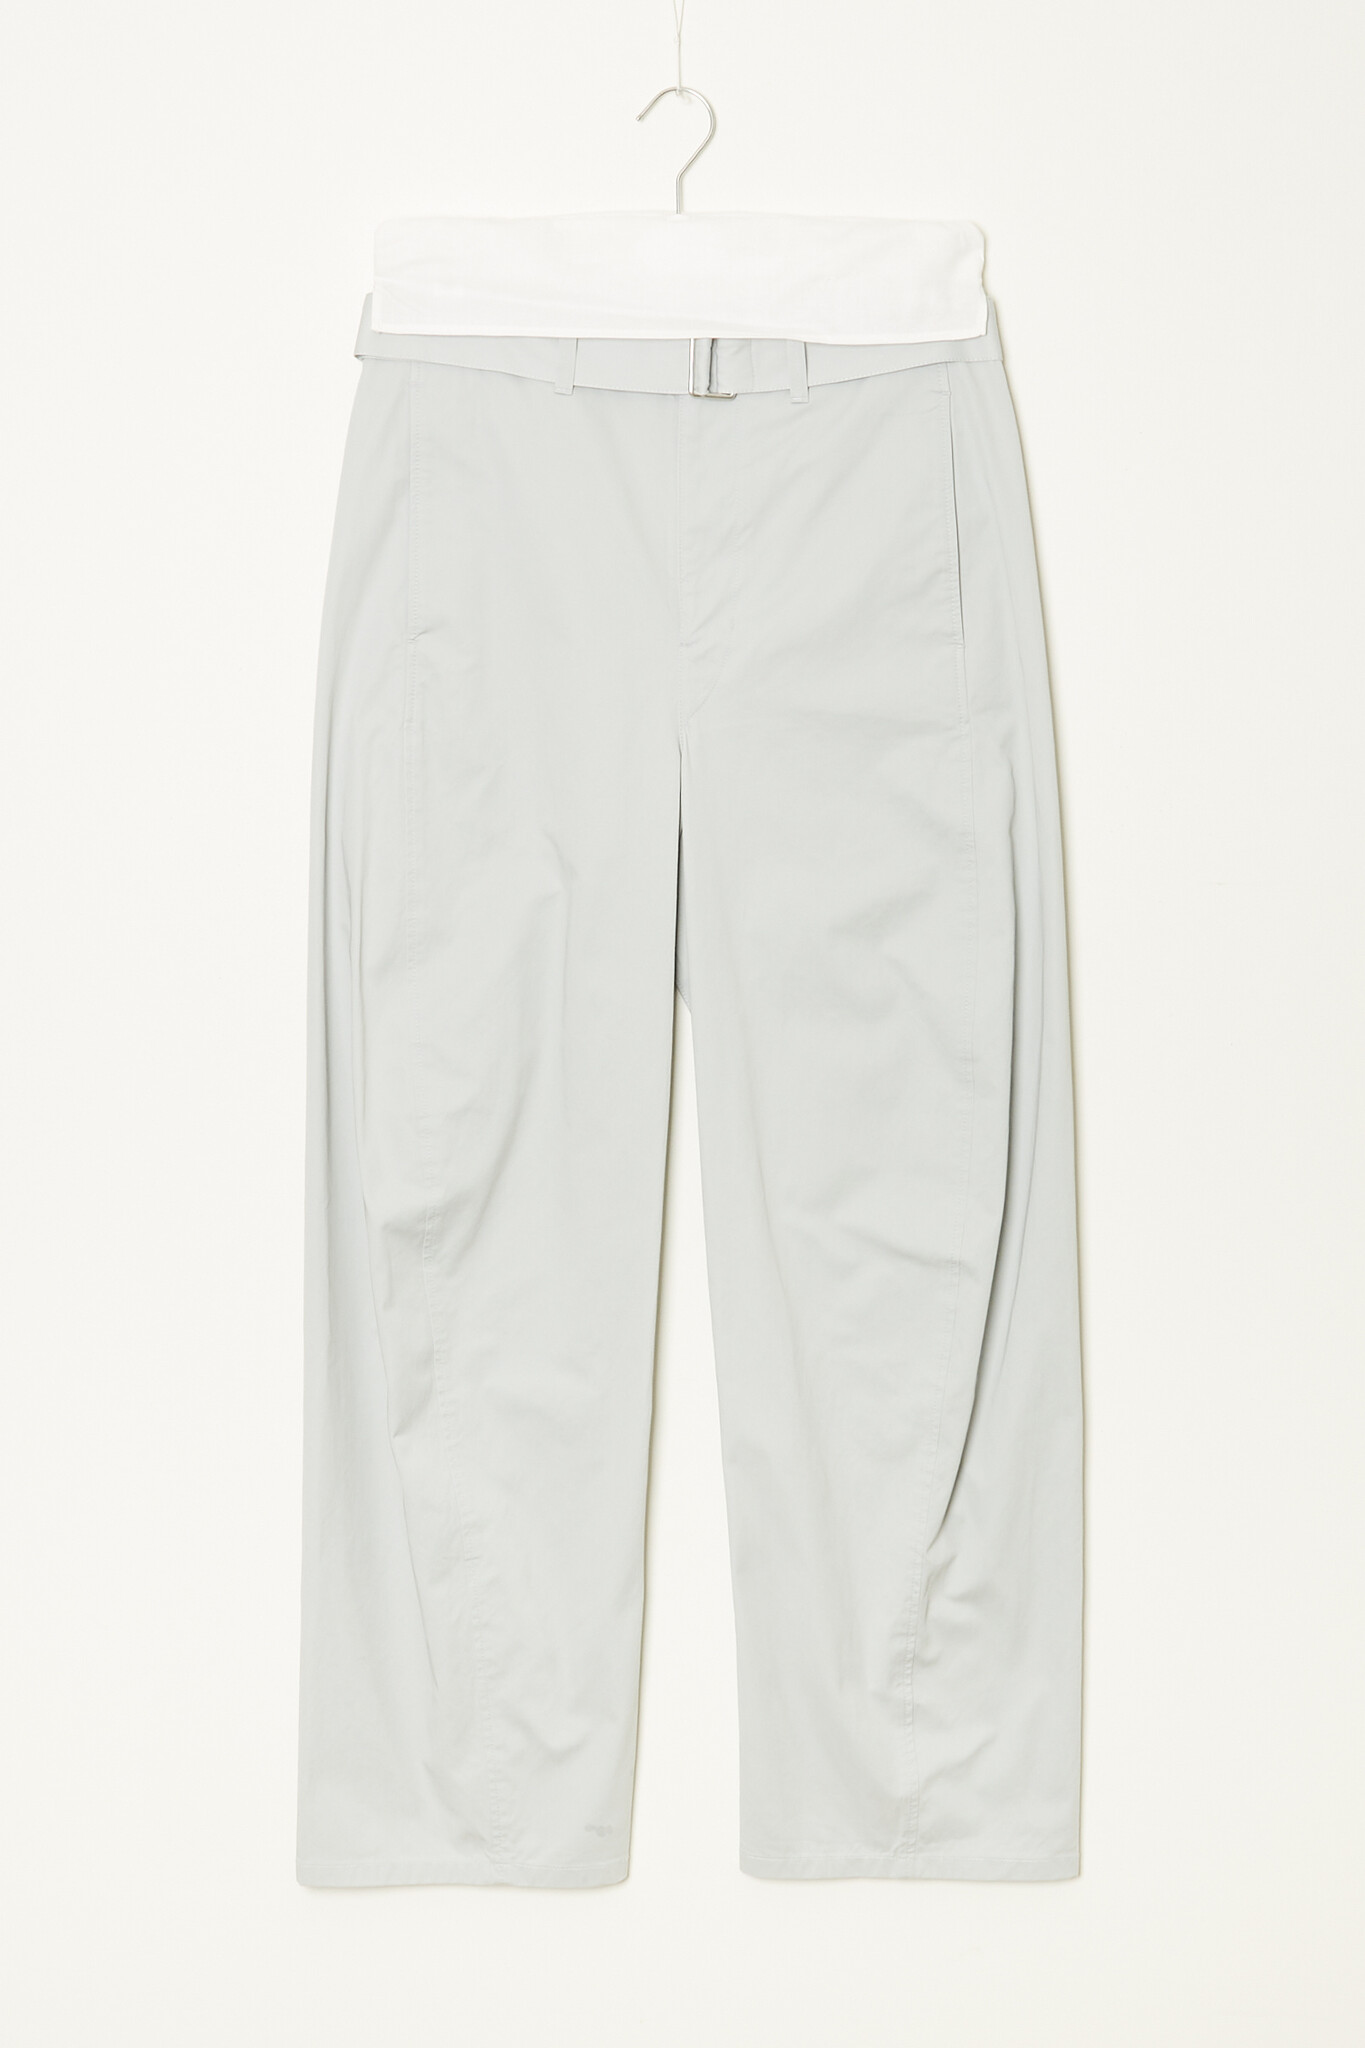 Lemaire - Light belted twisted pants